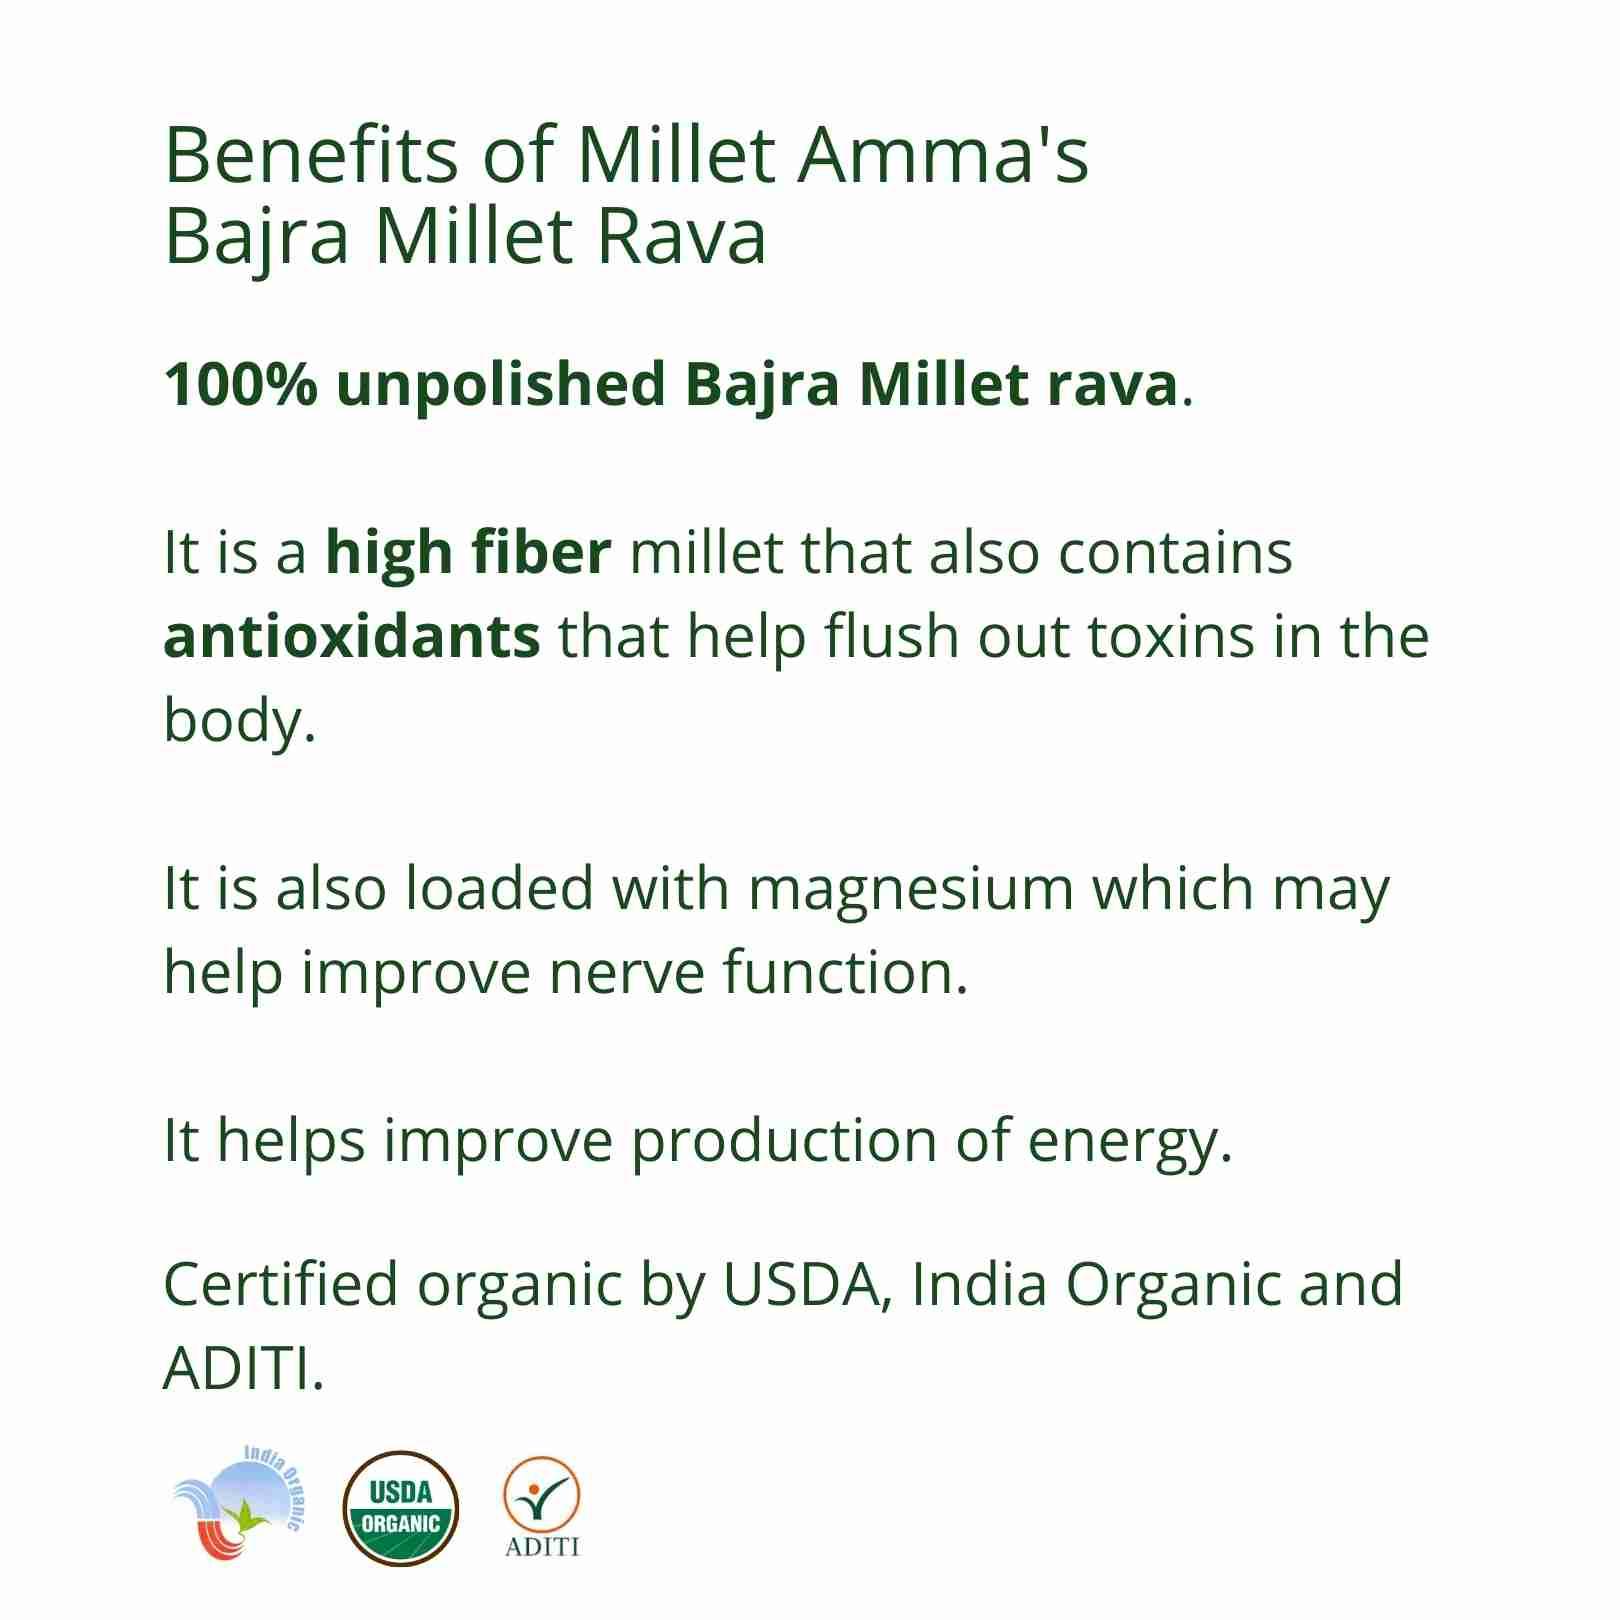 Milletamma’s Bajra Millet Rava is rich in fibre and it helps indigestion.  As it is gluten free flour, it is a good choice for the people who suffer from celiac disease.    It is good for lowering the bad cholesterol in the body and maintaining a good heart health.